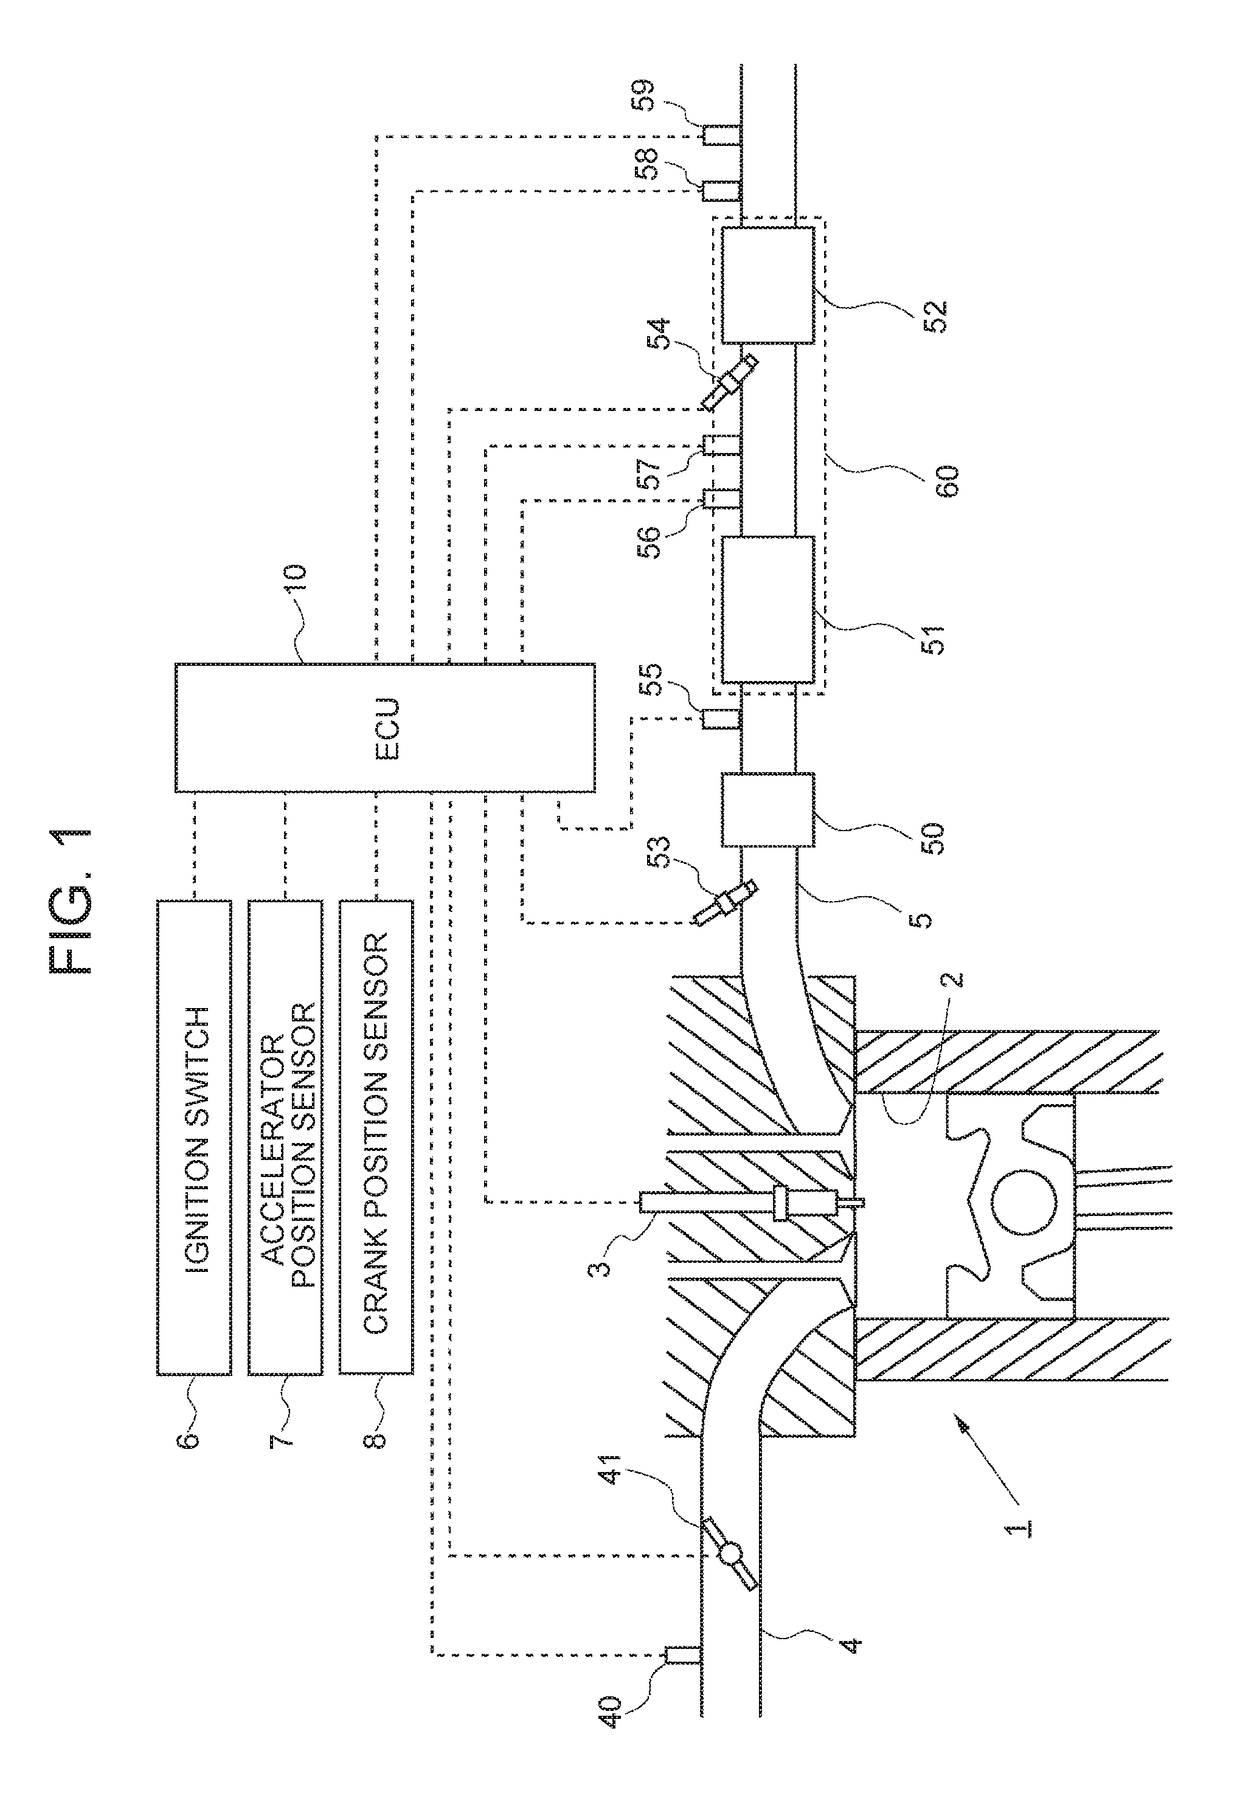 Exhaust gas control system for internal combustion engine